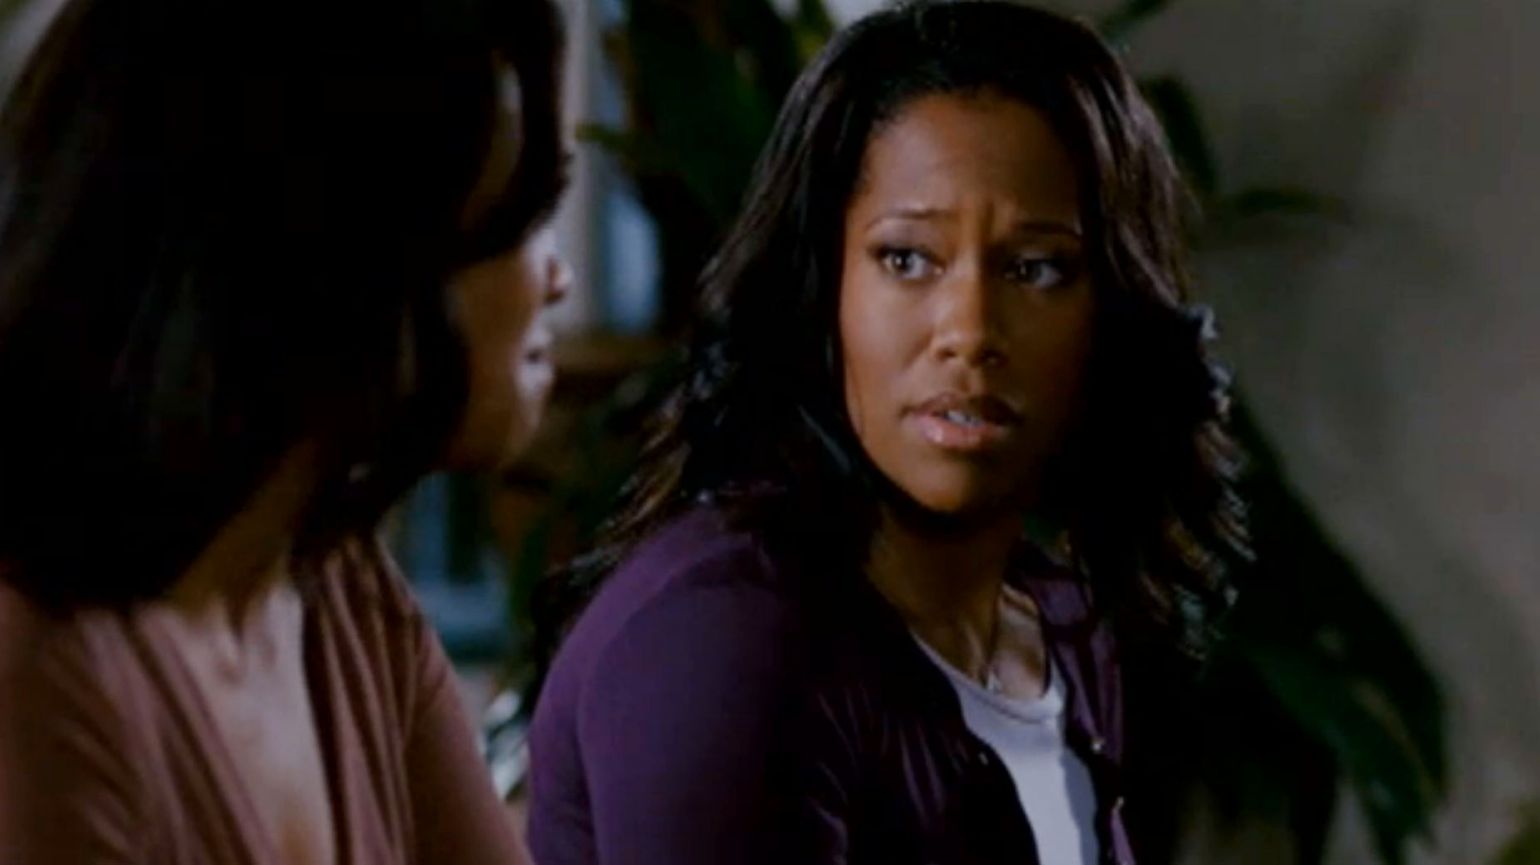 A Timeline Of Regina King's Most Memorable Yet Underrated Roles